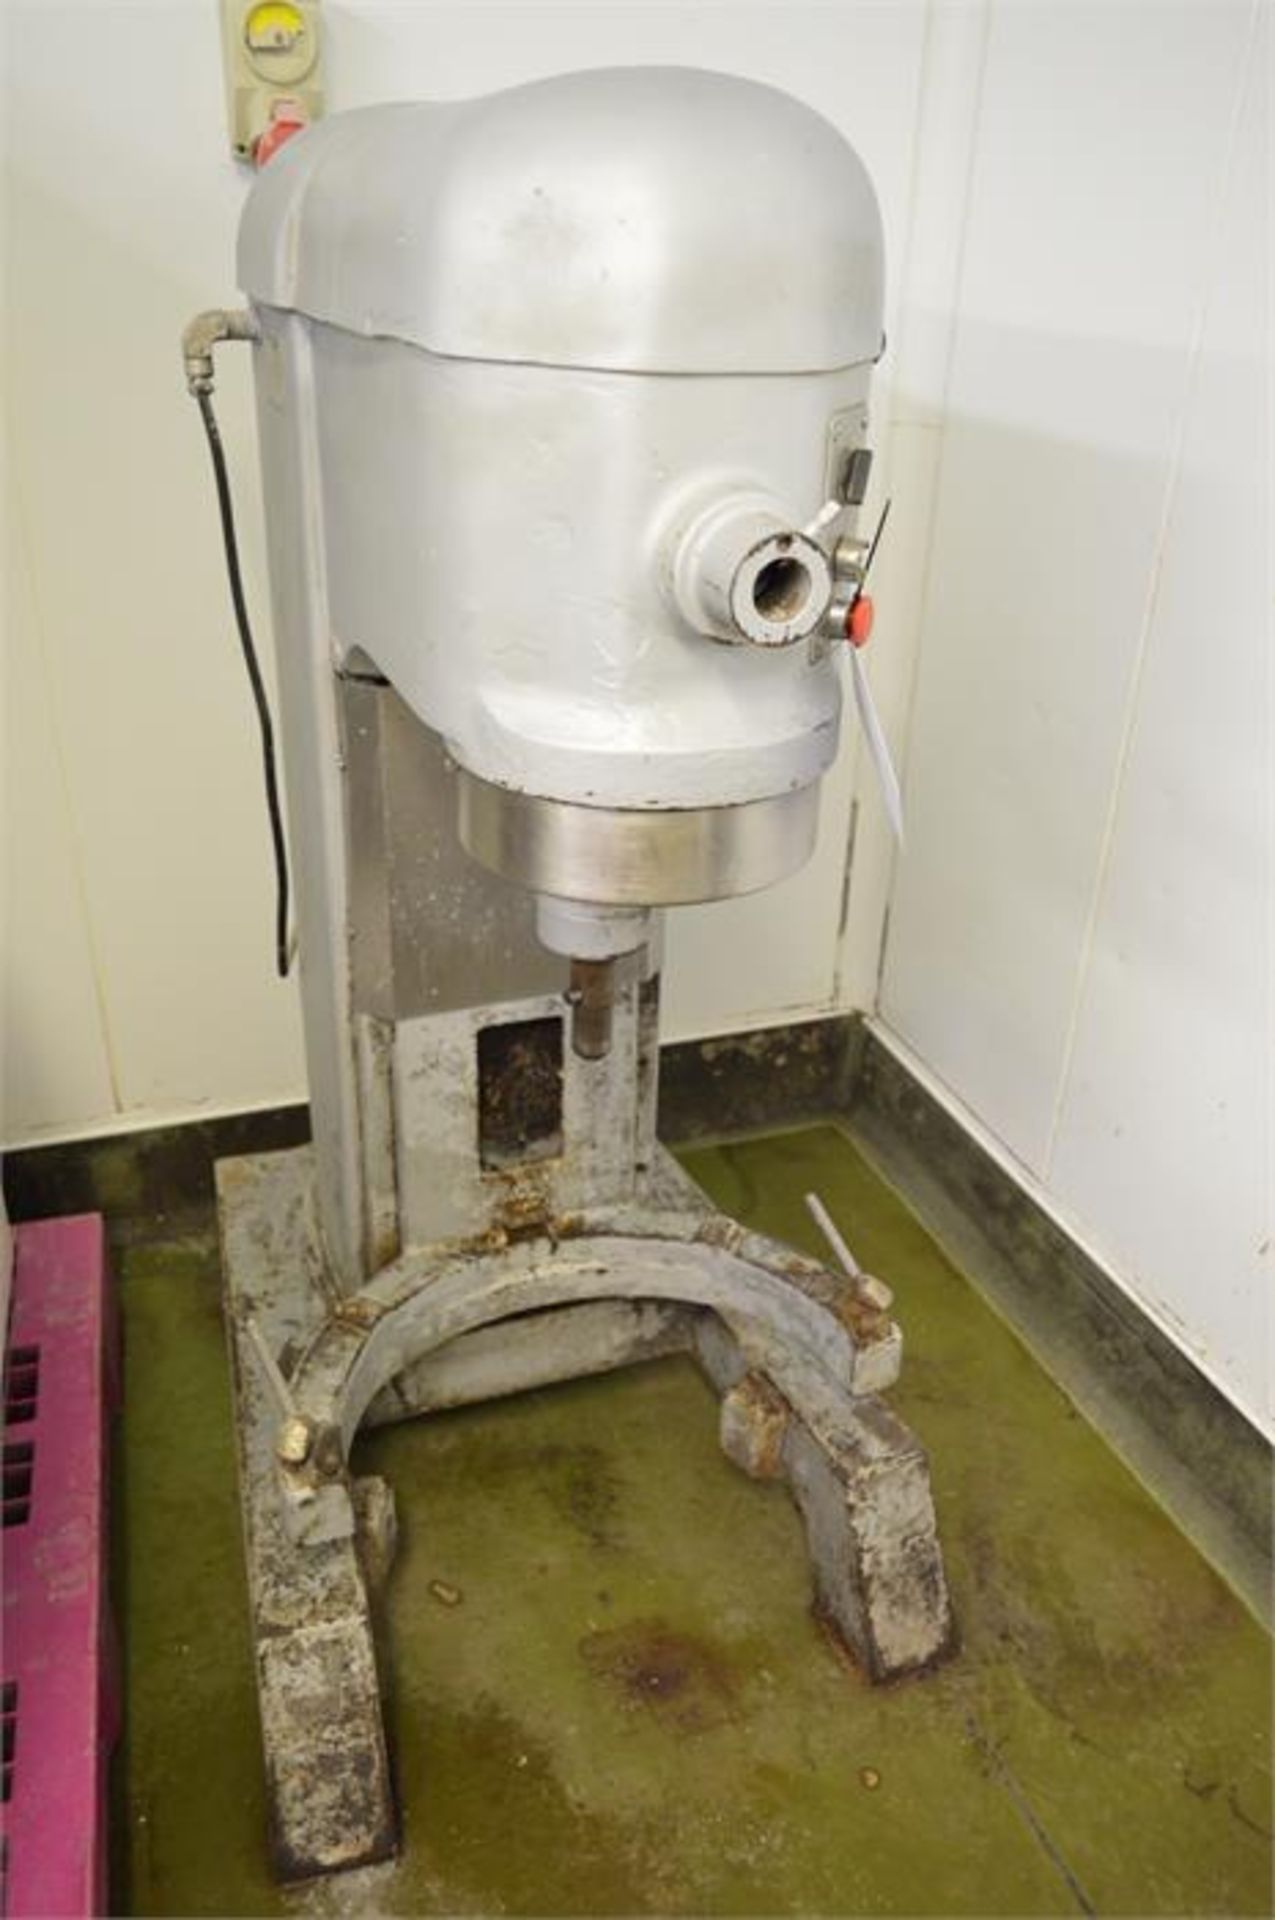 Hobart, Model H600, industrial stand mixer, Serial No. 97.071.078 (Located at Continental